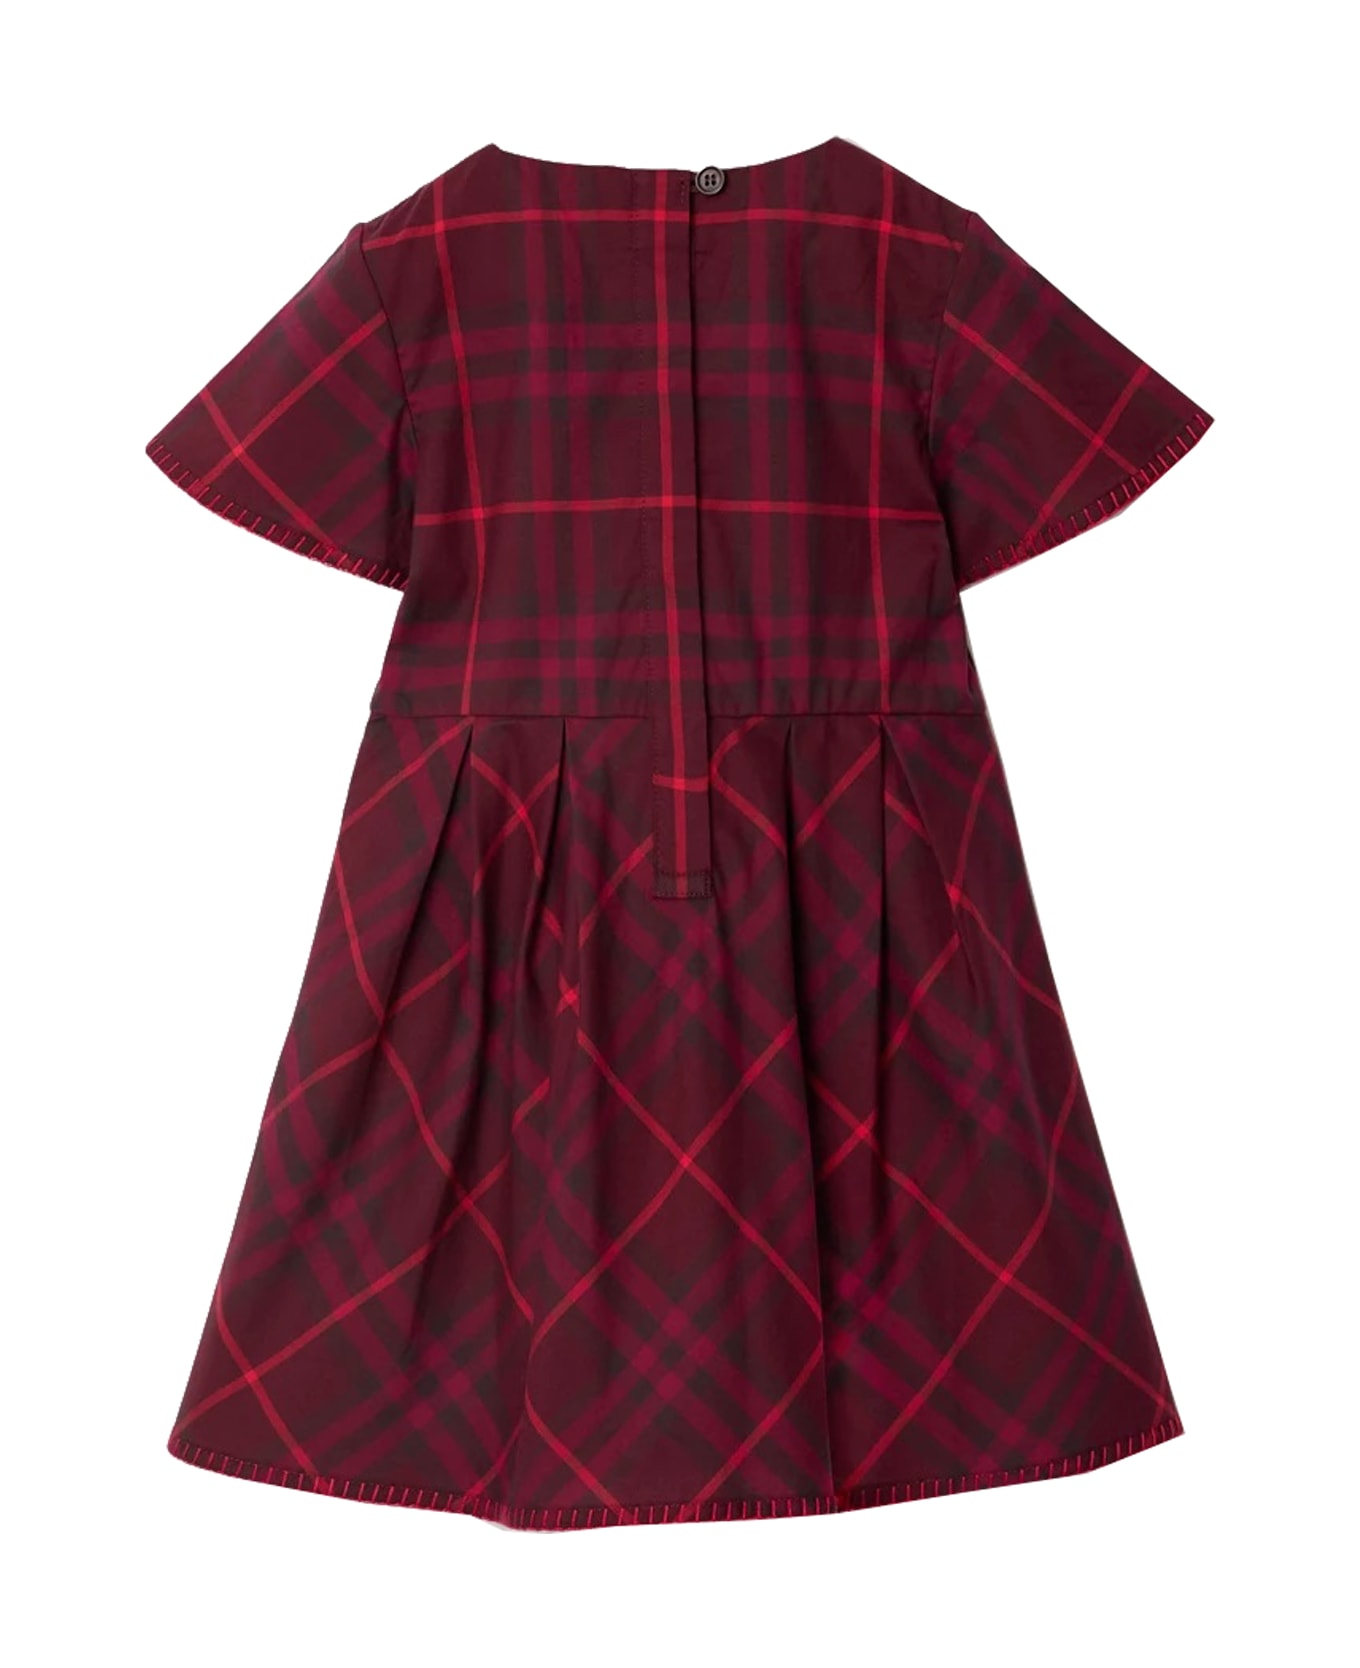 Burberry Pleated Dress In Checked Cotton - Red